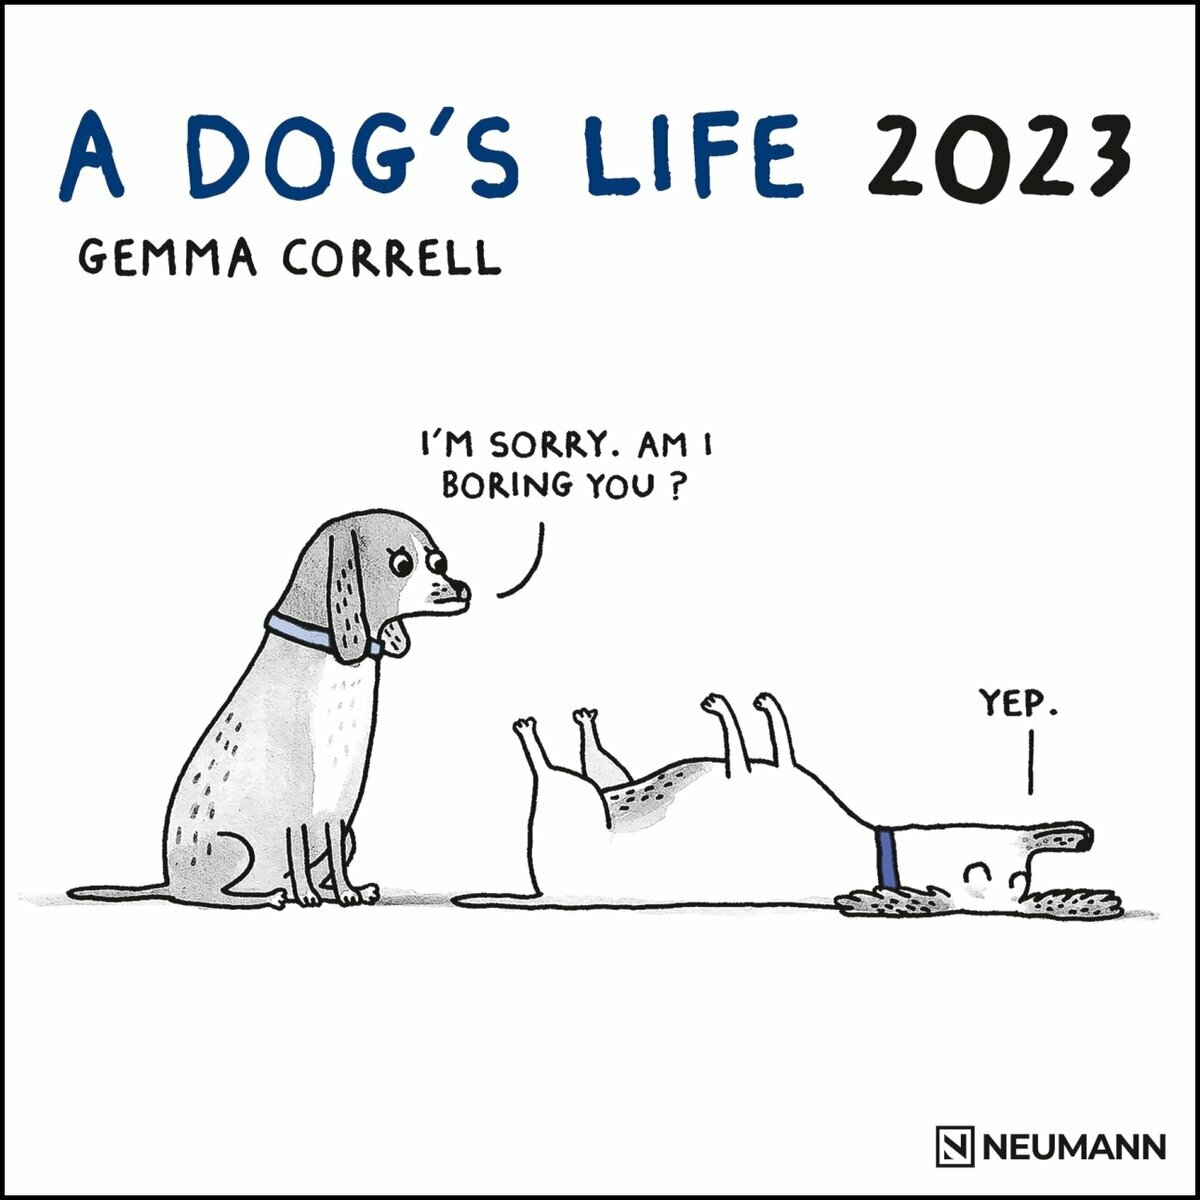 calendrier BD humour chat - a dog's life 2023